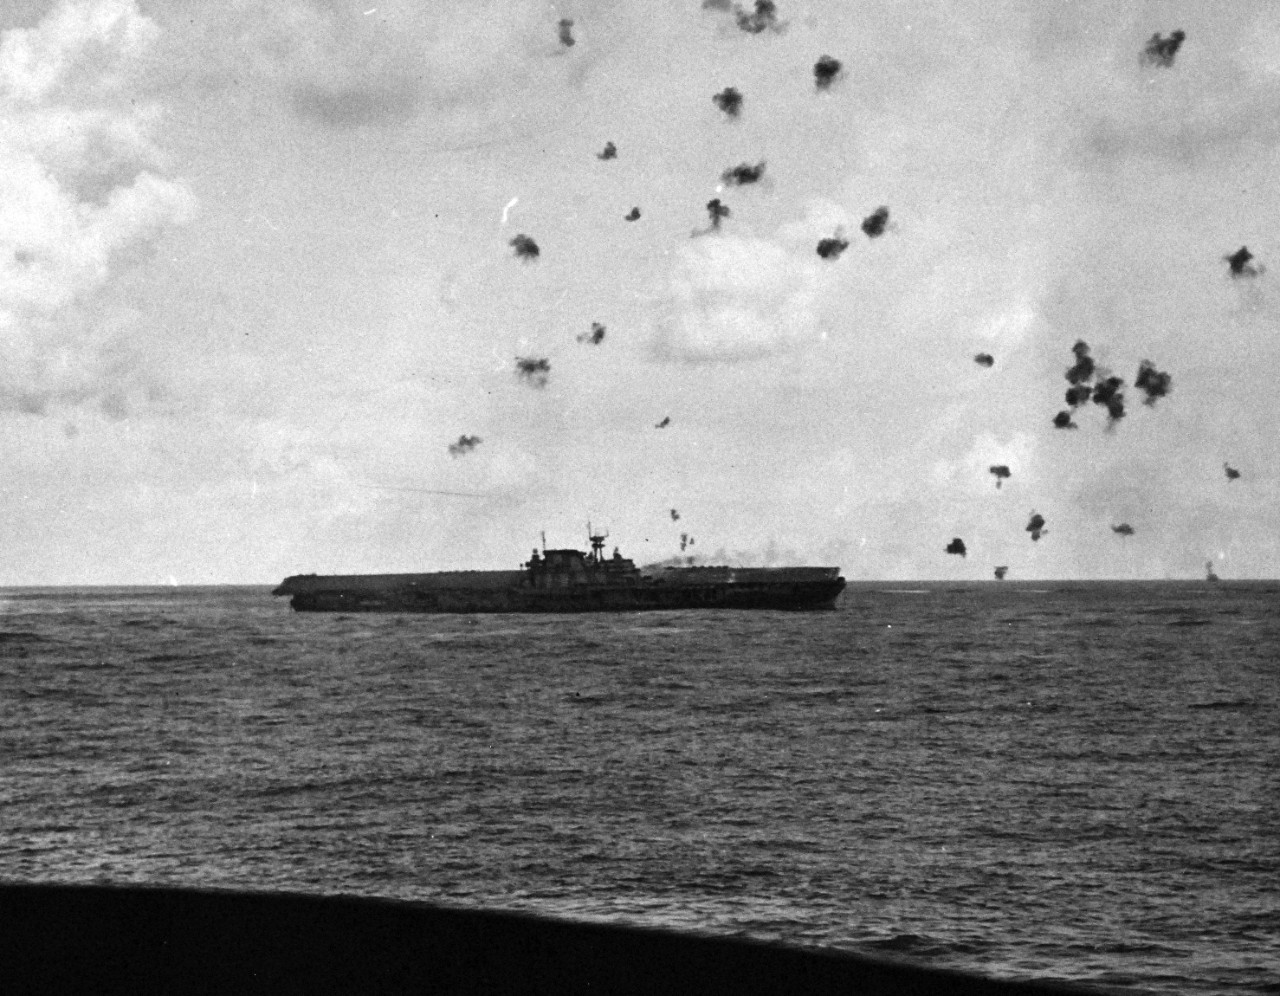 80-G-33898:  Battle of Santa Cruz Islands,  26 October 1942.   USS Hornet (CV 8) listing after the Japanese attack, she was abandoned at this point.   Photographed from USS Pensacola (CA 24).  U.S. Navy photograph, now in the collections of the National Archives.  (2015/11/17).